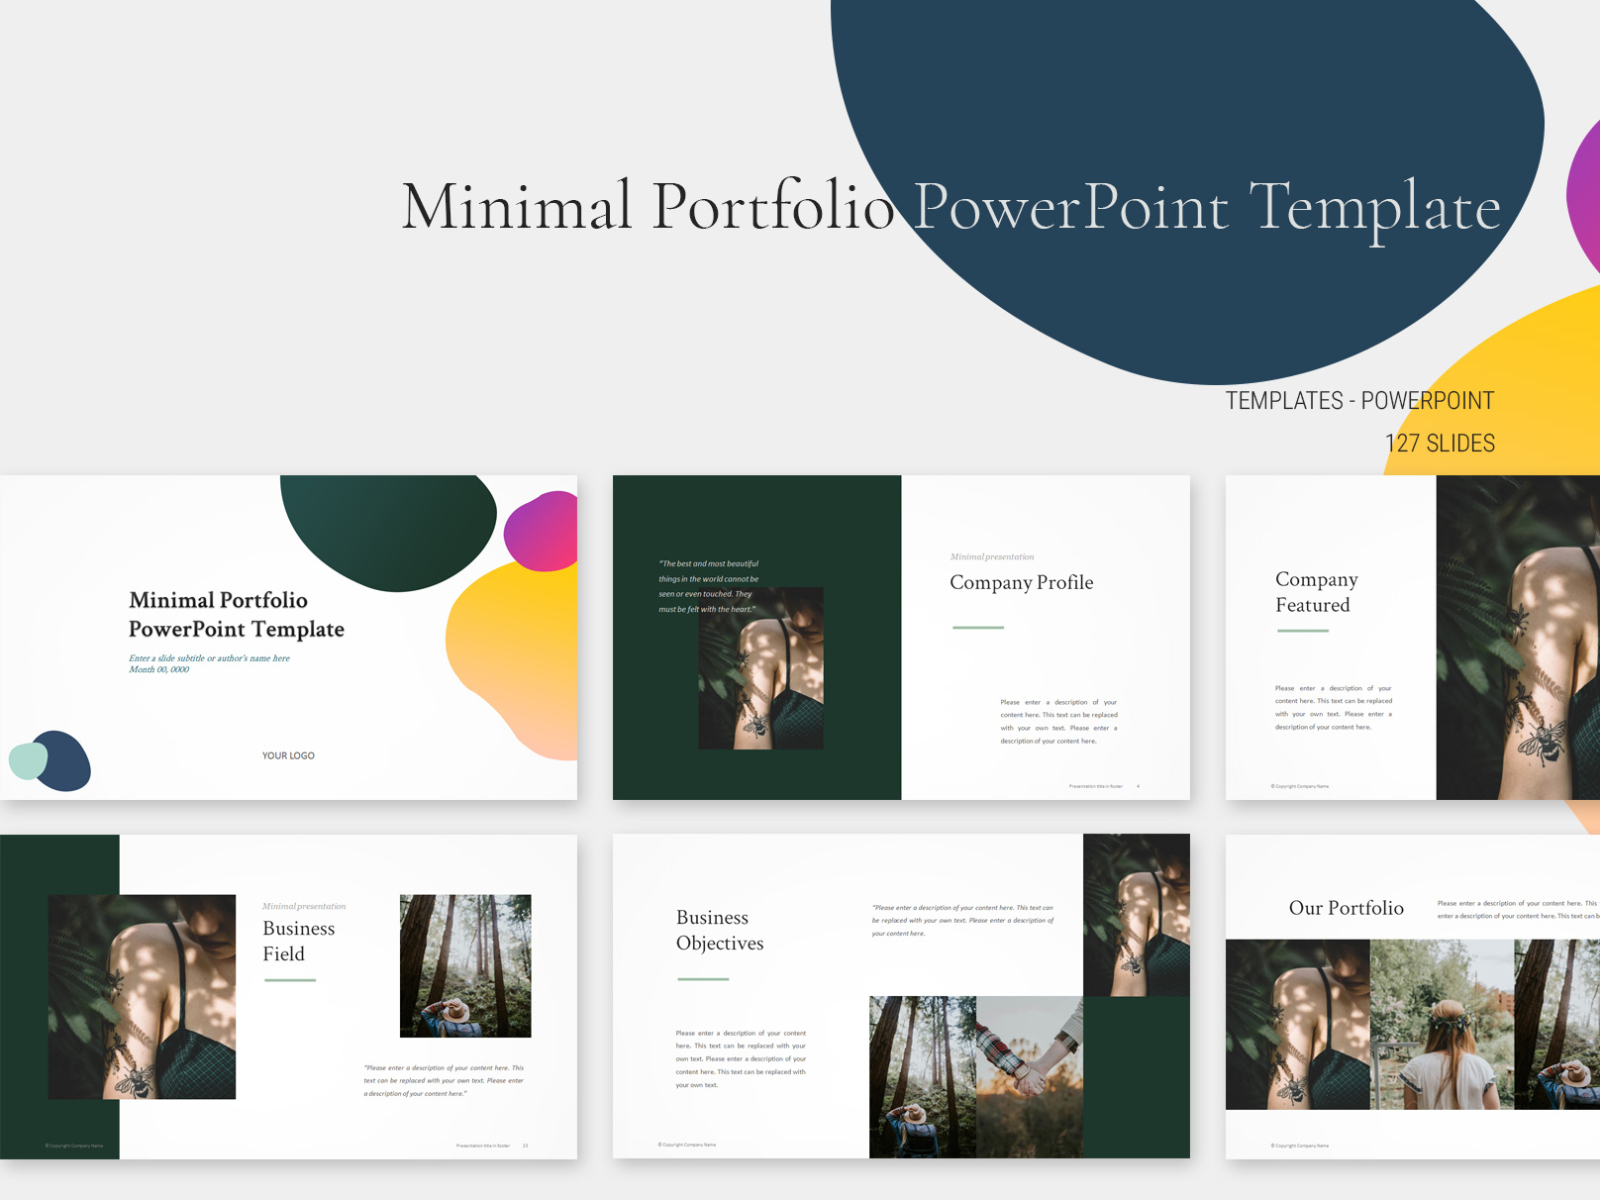 simple-portfolio-powerpoint-template-by-creativeforest-on-dribbble